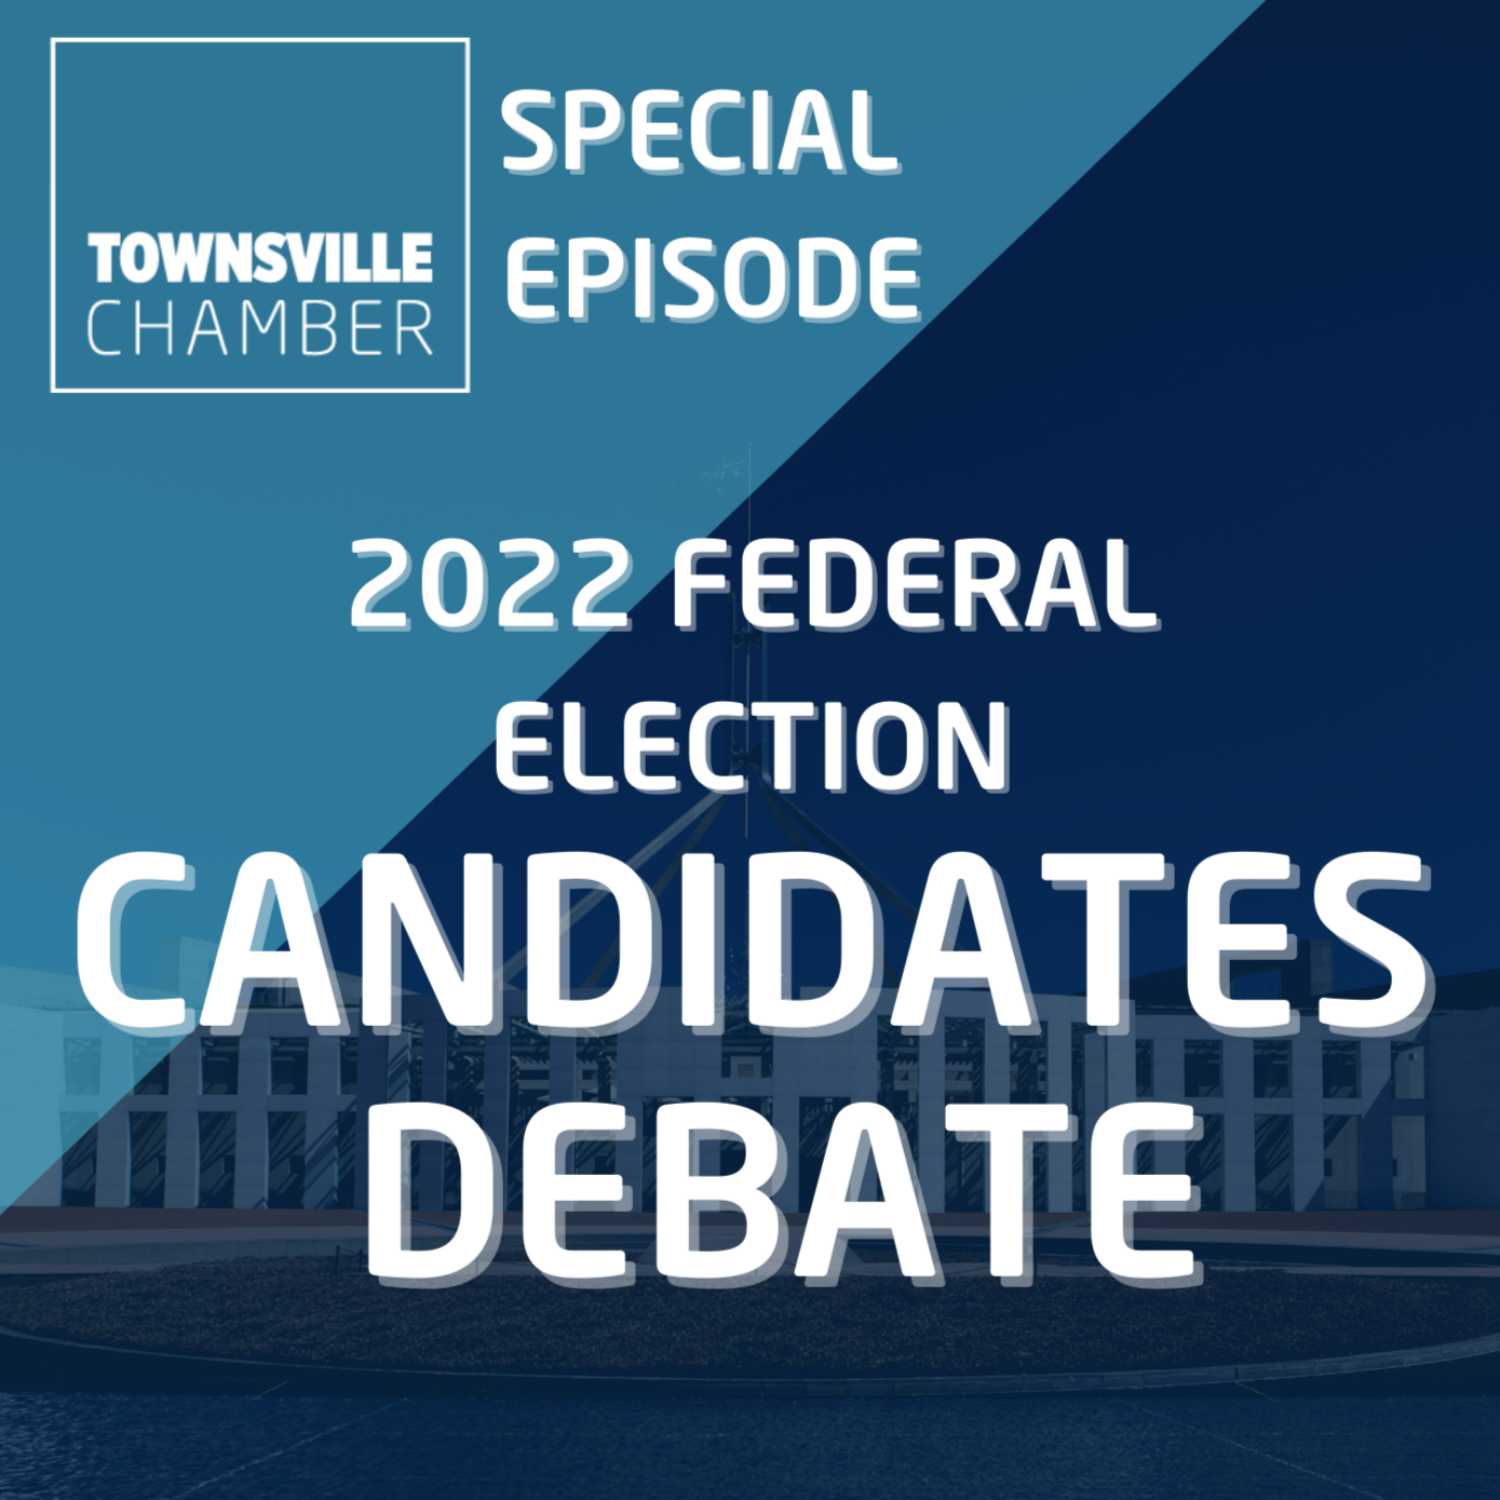 SPECIAL EPISODE: LNP Candidate Phillip Thompson OAM